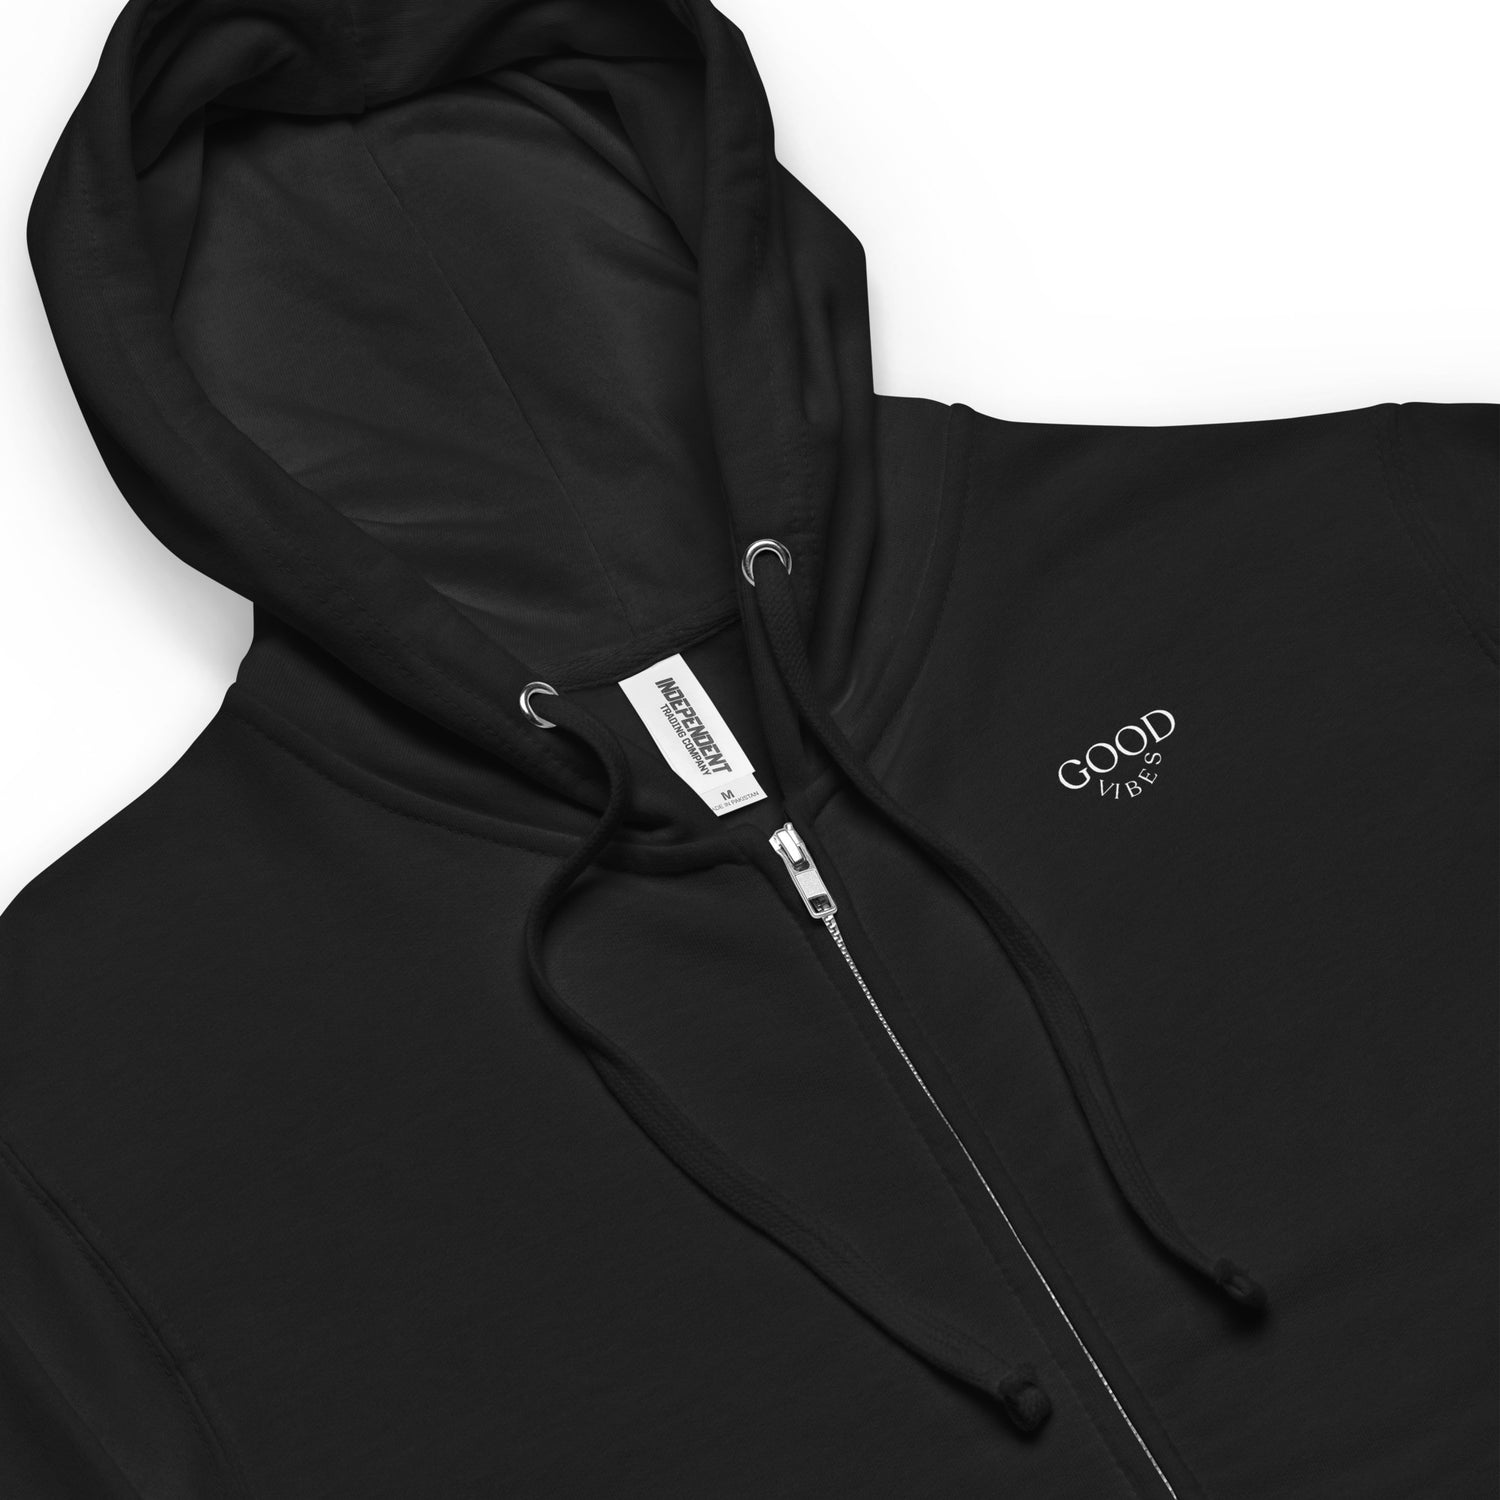 Front closeup of Black zip up hoodie, designed to support mental health, "Good Vibes"